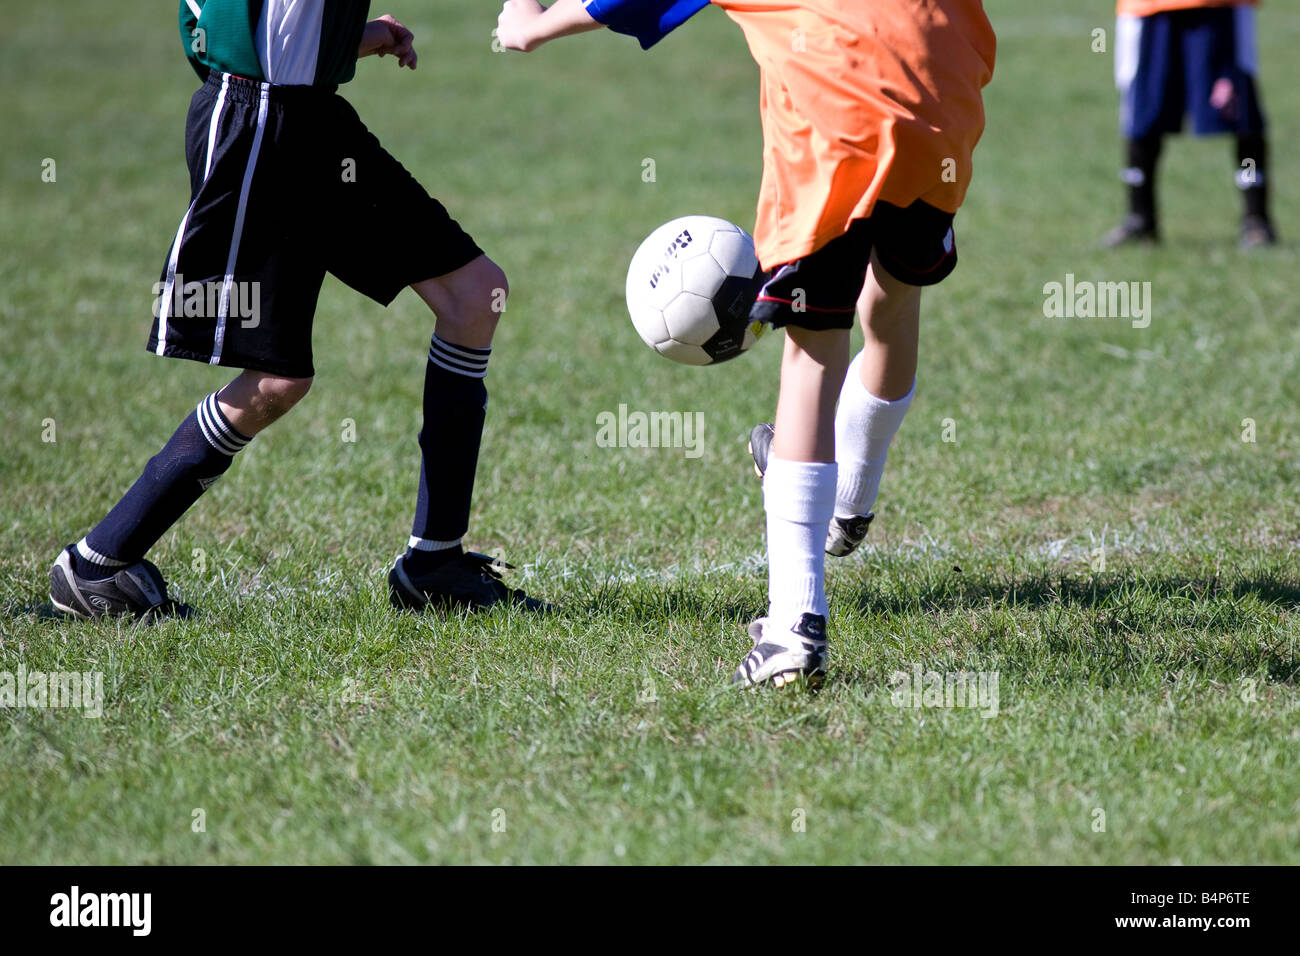 A Saturday league soccer football match game. Stock Photo